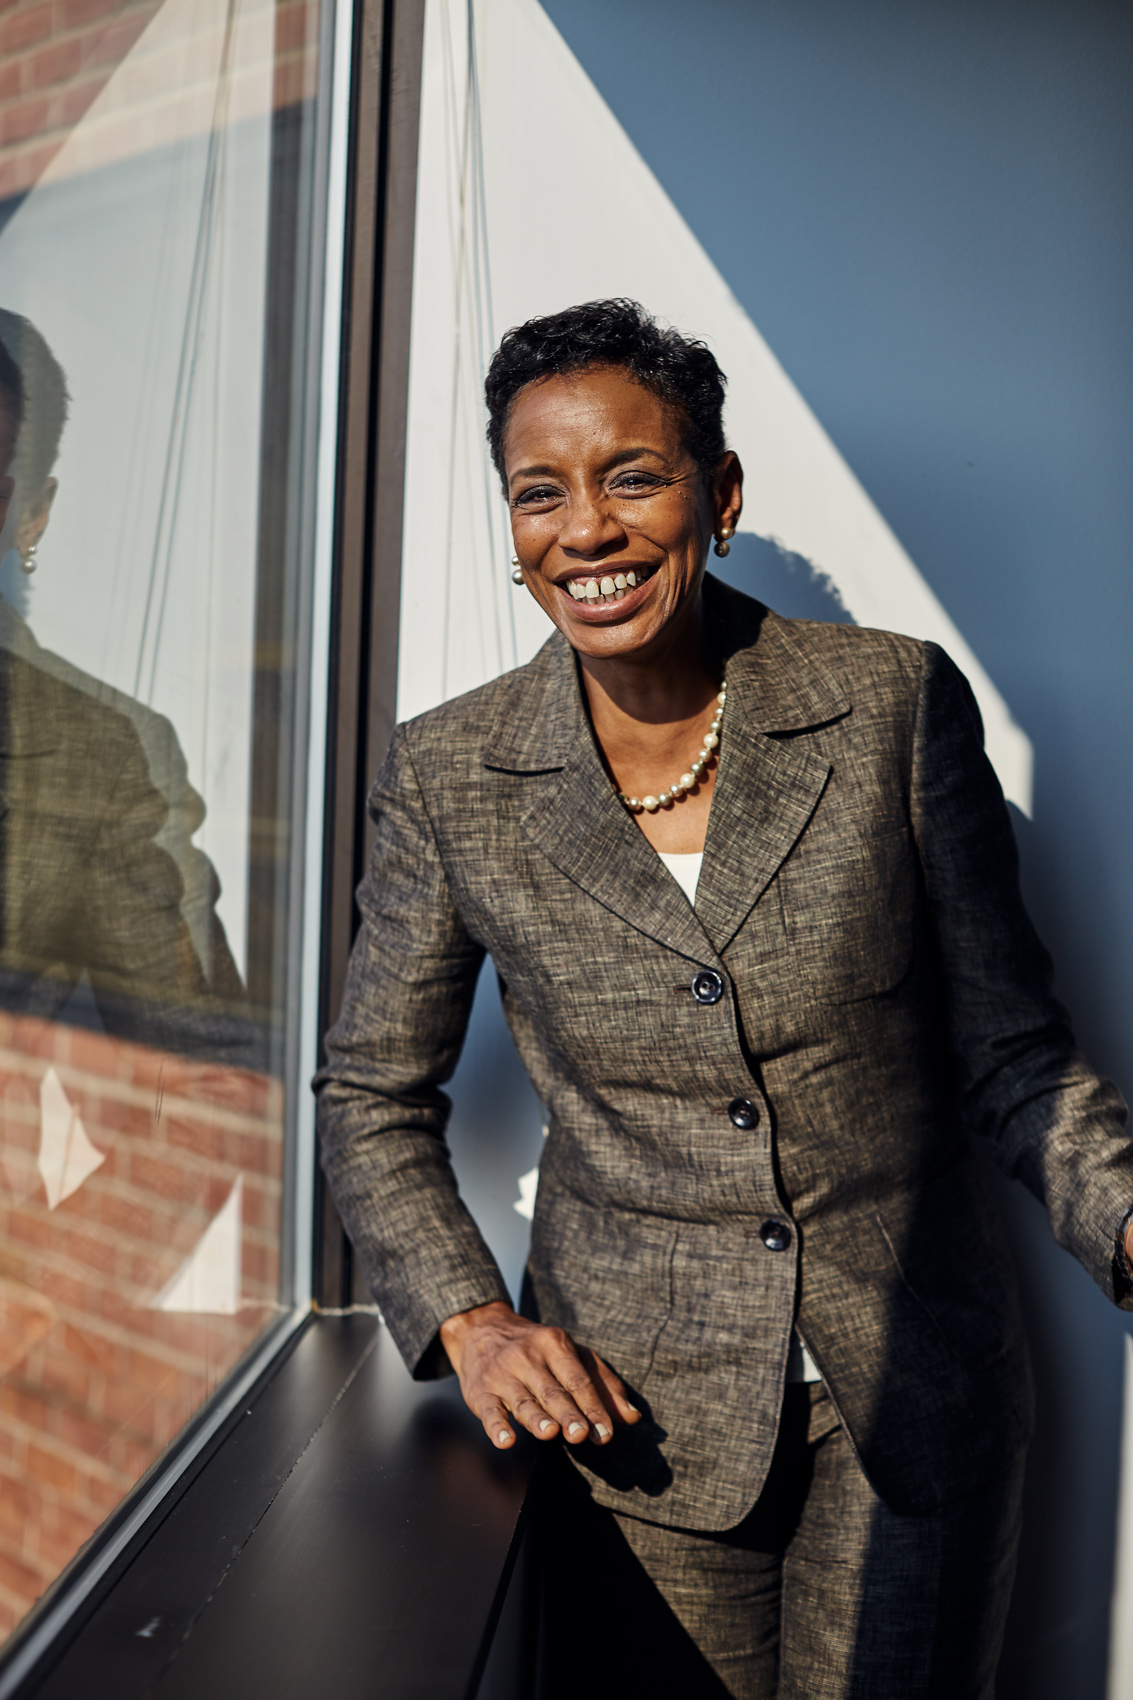 Former Maryland Congresswoman Donna Edwards poses for a portrait by a window in her campaign office.